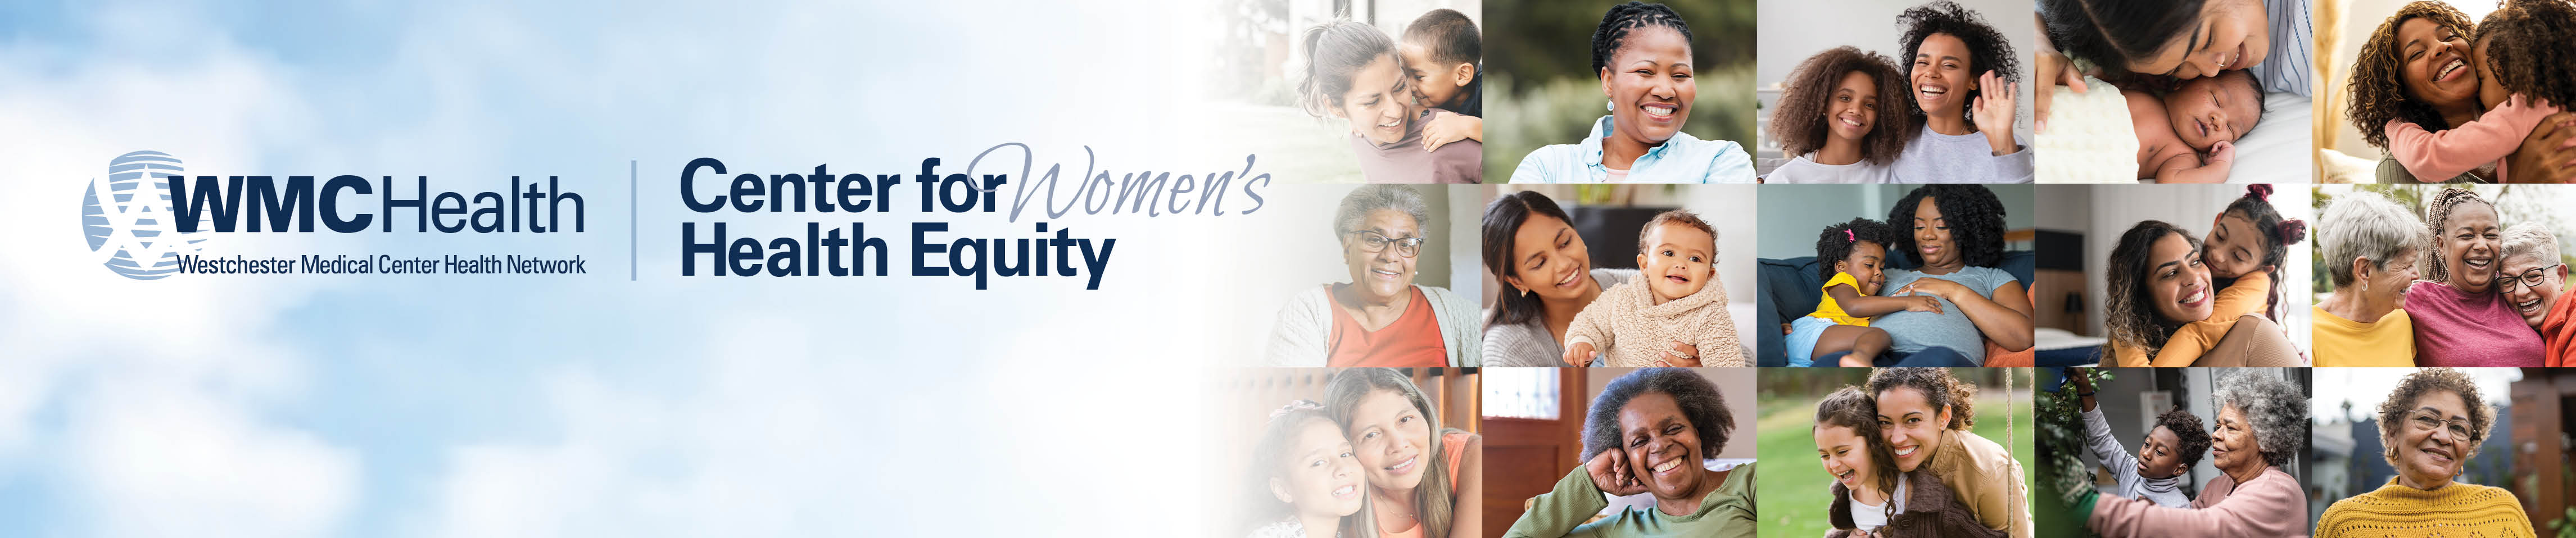 The Center for Women's Health Equity